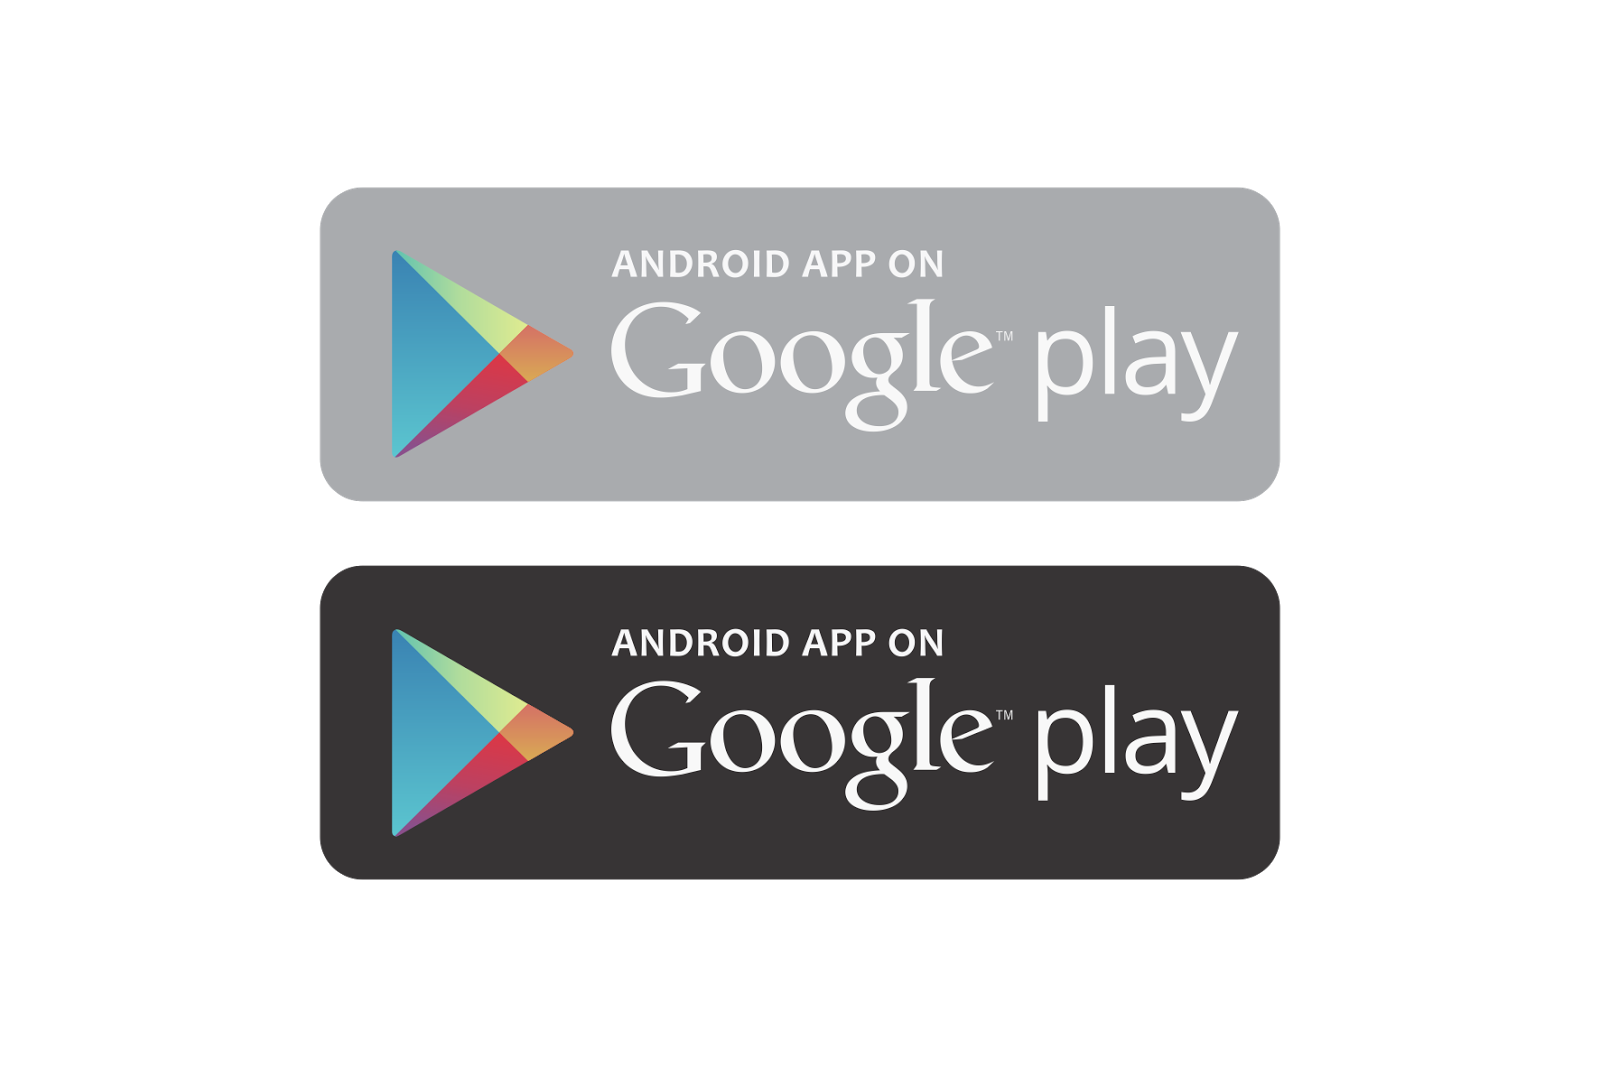 android app on google play vector logo